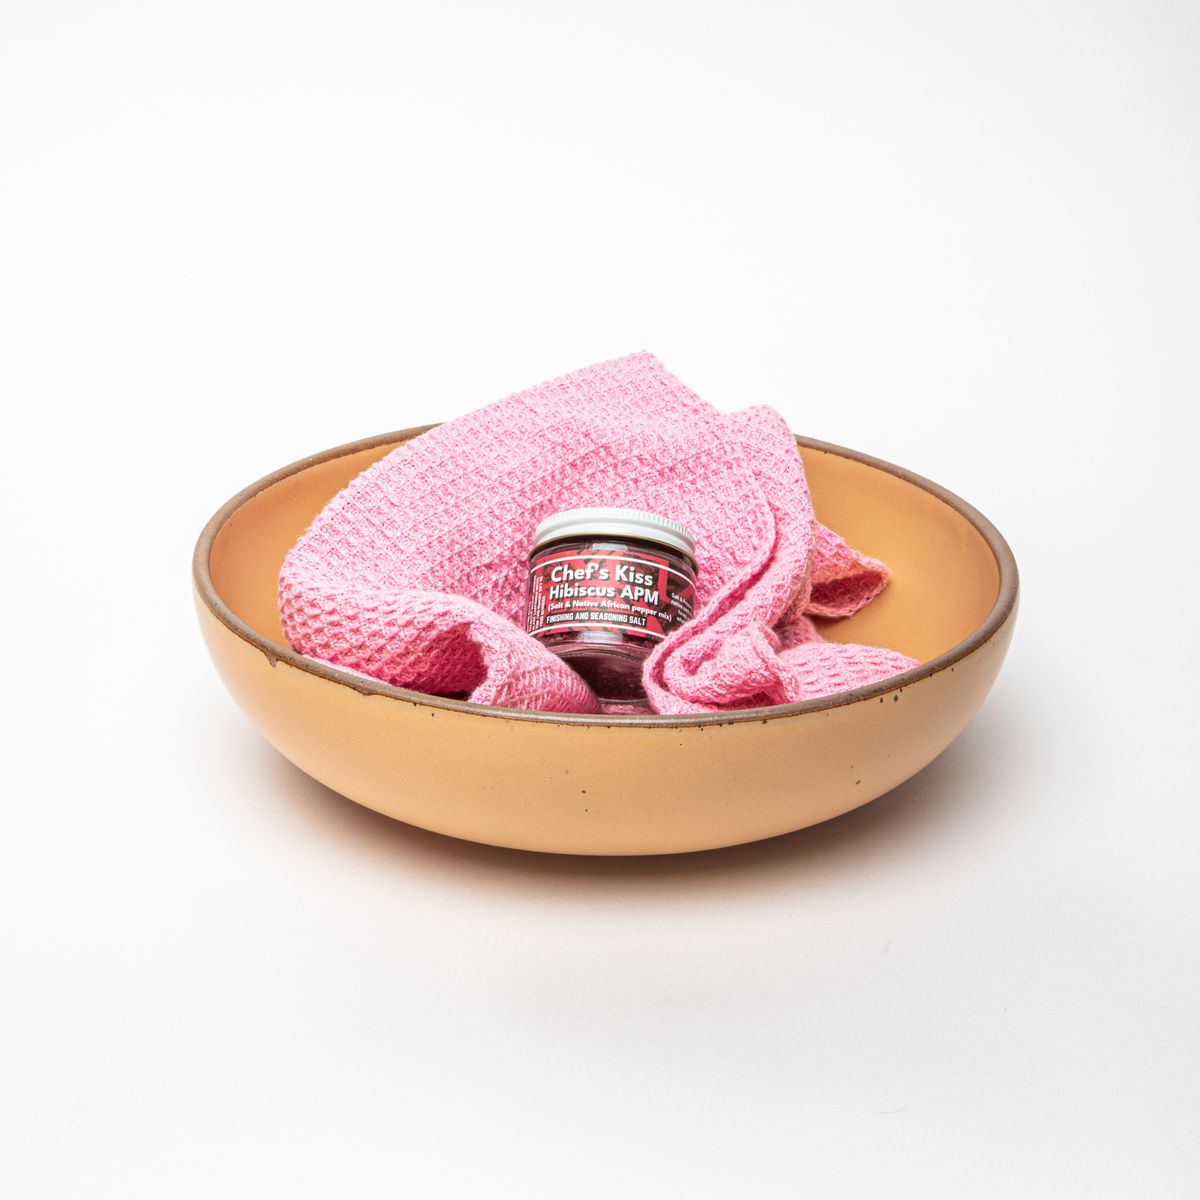 A large serving bowl in a peachy yellow color with a warm pink waffle towel and a small jar with a white top and a label that reads "Chef's Kiss Hibiscus APM" inside